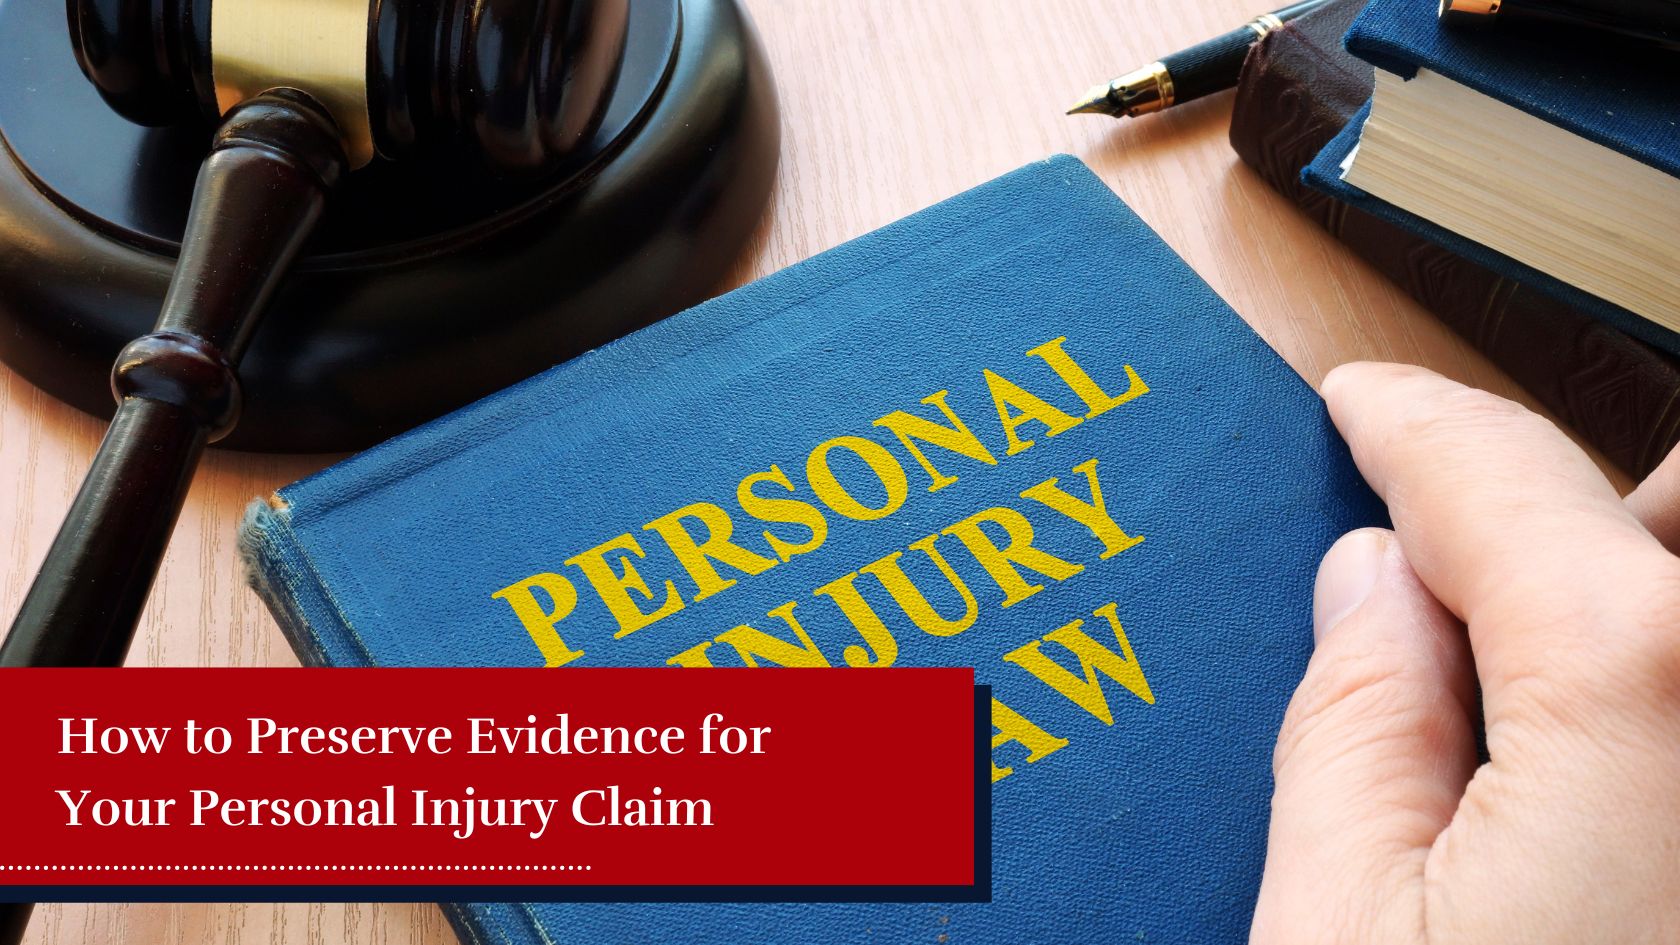 Personal injury law book and gavel